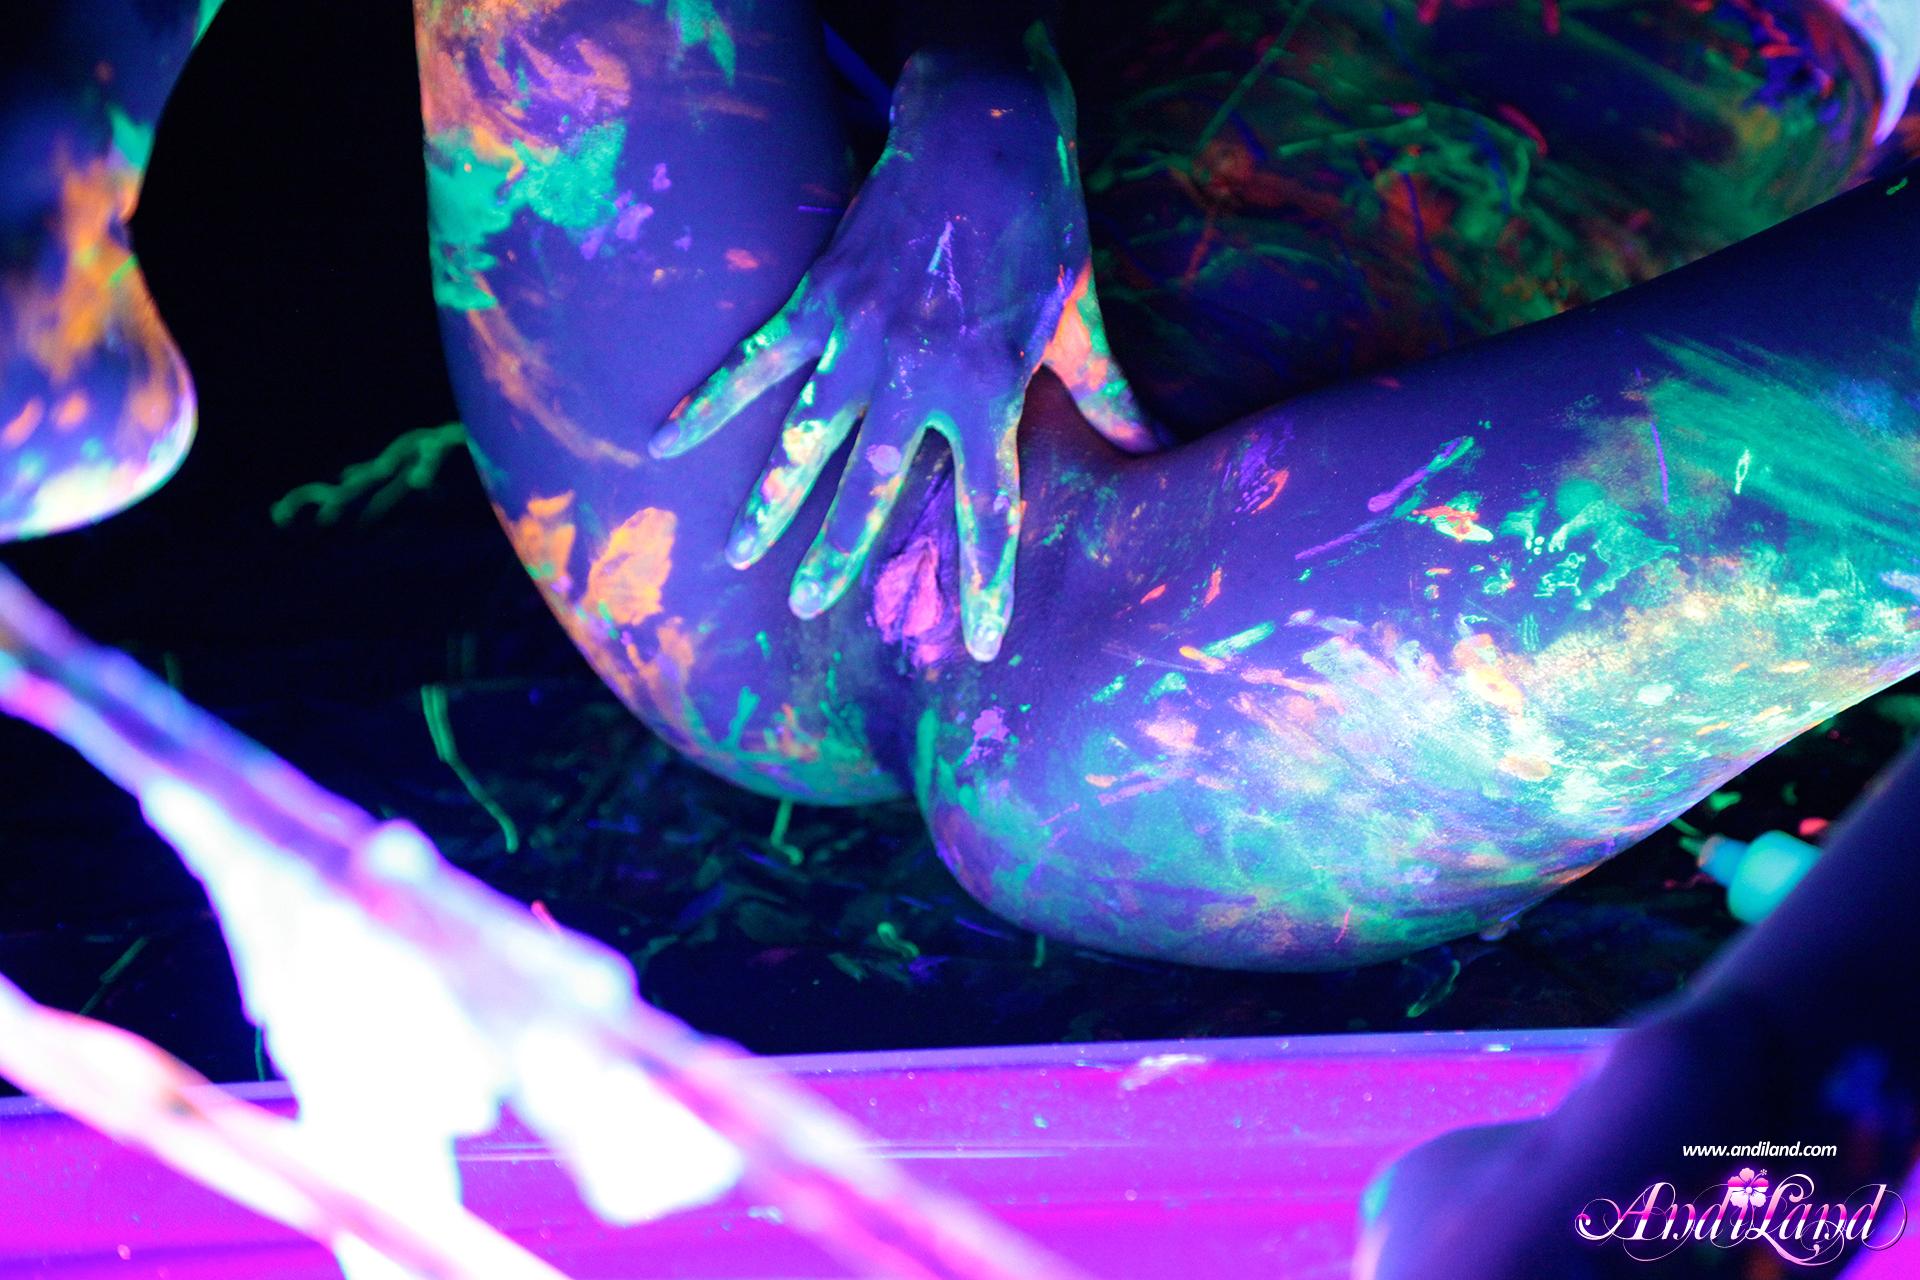 Andi Land gets super kinky with the black light and neon body paint #53134575